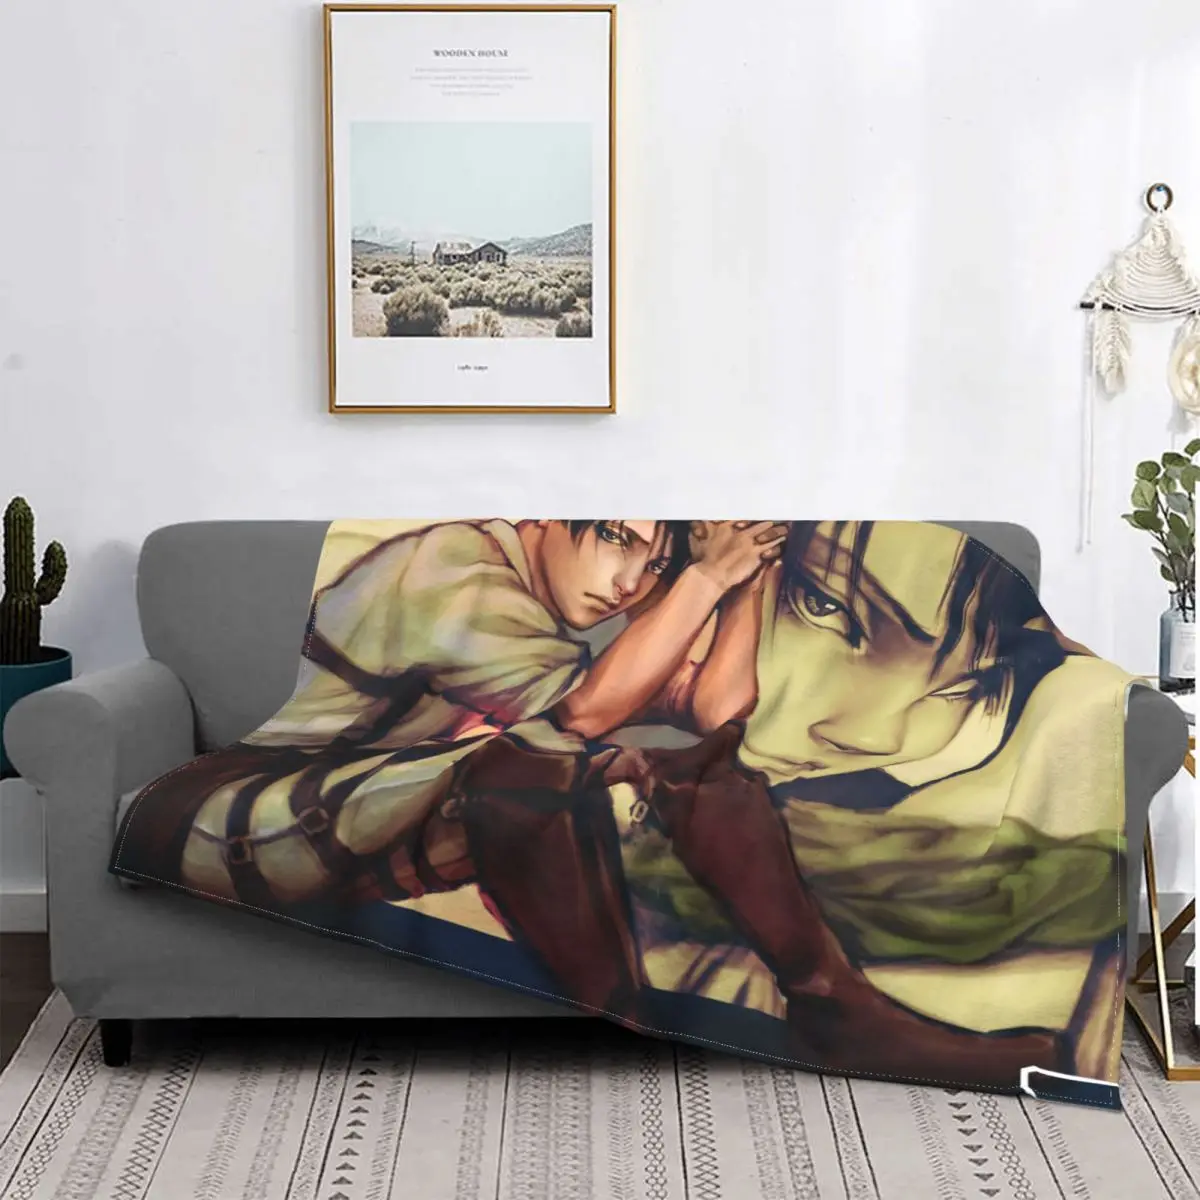 

Ultra-Soft Fleece Attack On Titan Throw Blanket for Bedroom Home Couch Quilt Warm Flannel Anime Shingeki No Kyojin Blankets